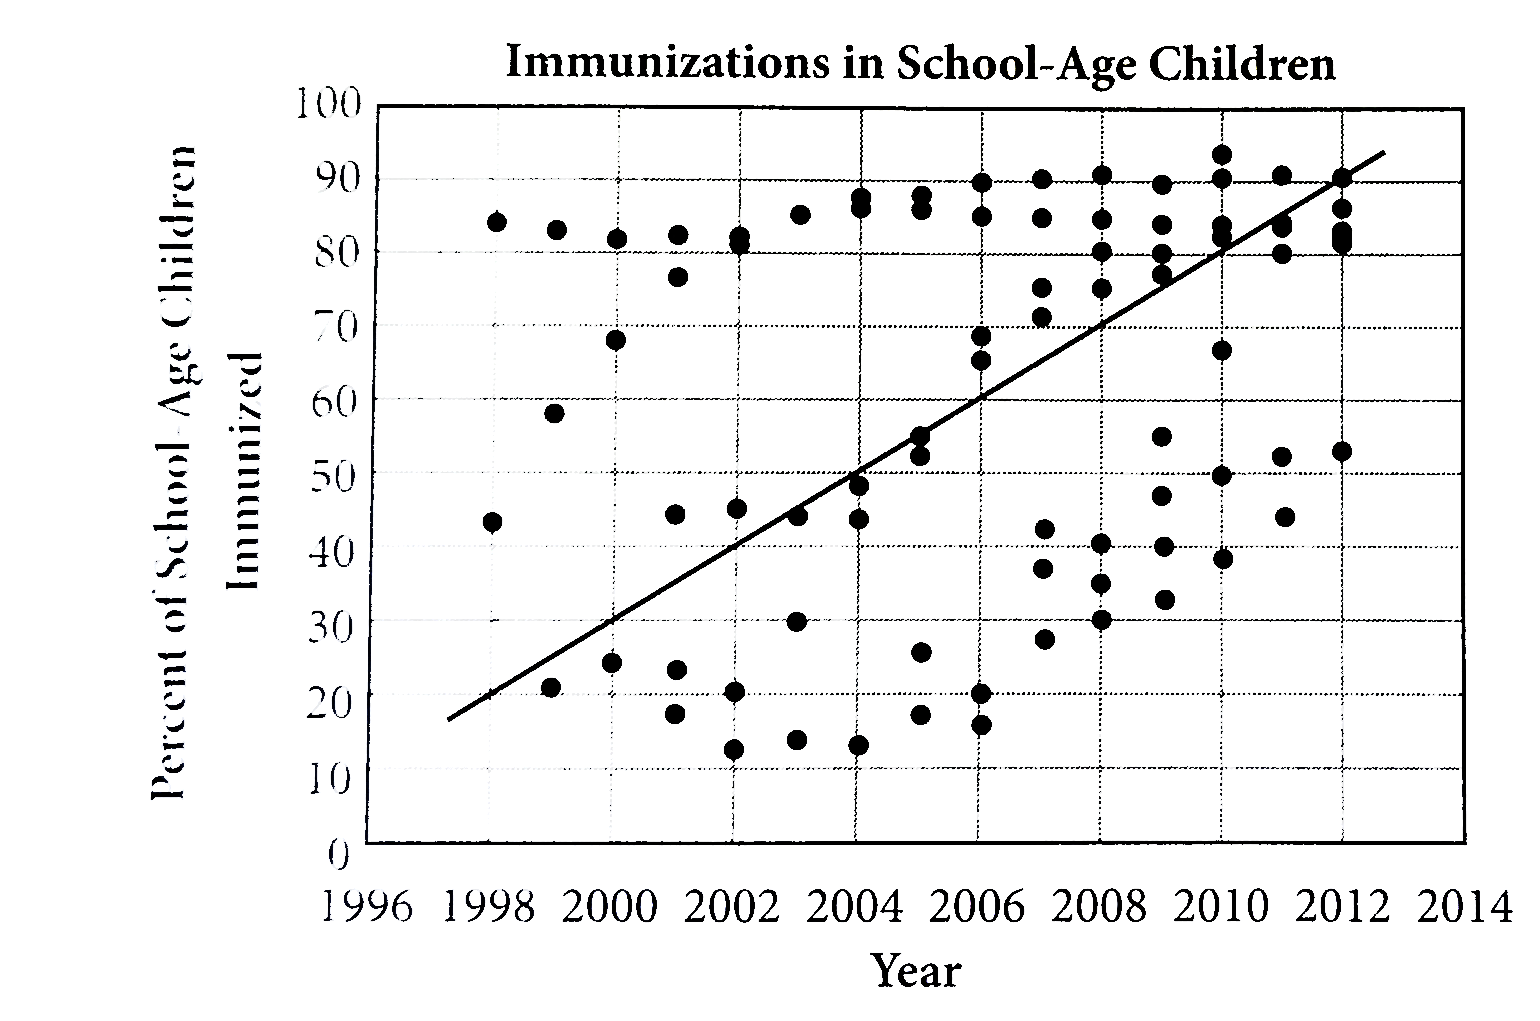 The graph above shows the percent of school-age children in the United States who received immunization for various illnesses beetween 1996 and 2012. What was the average rate of increase in the percent of children immunized per year over the given time period ?